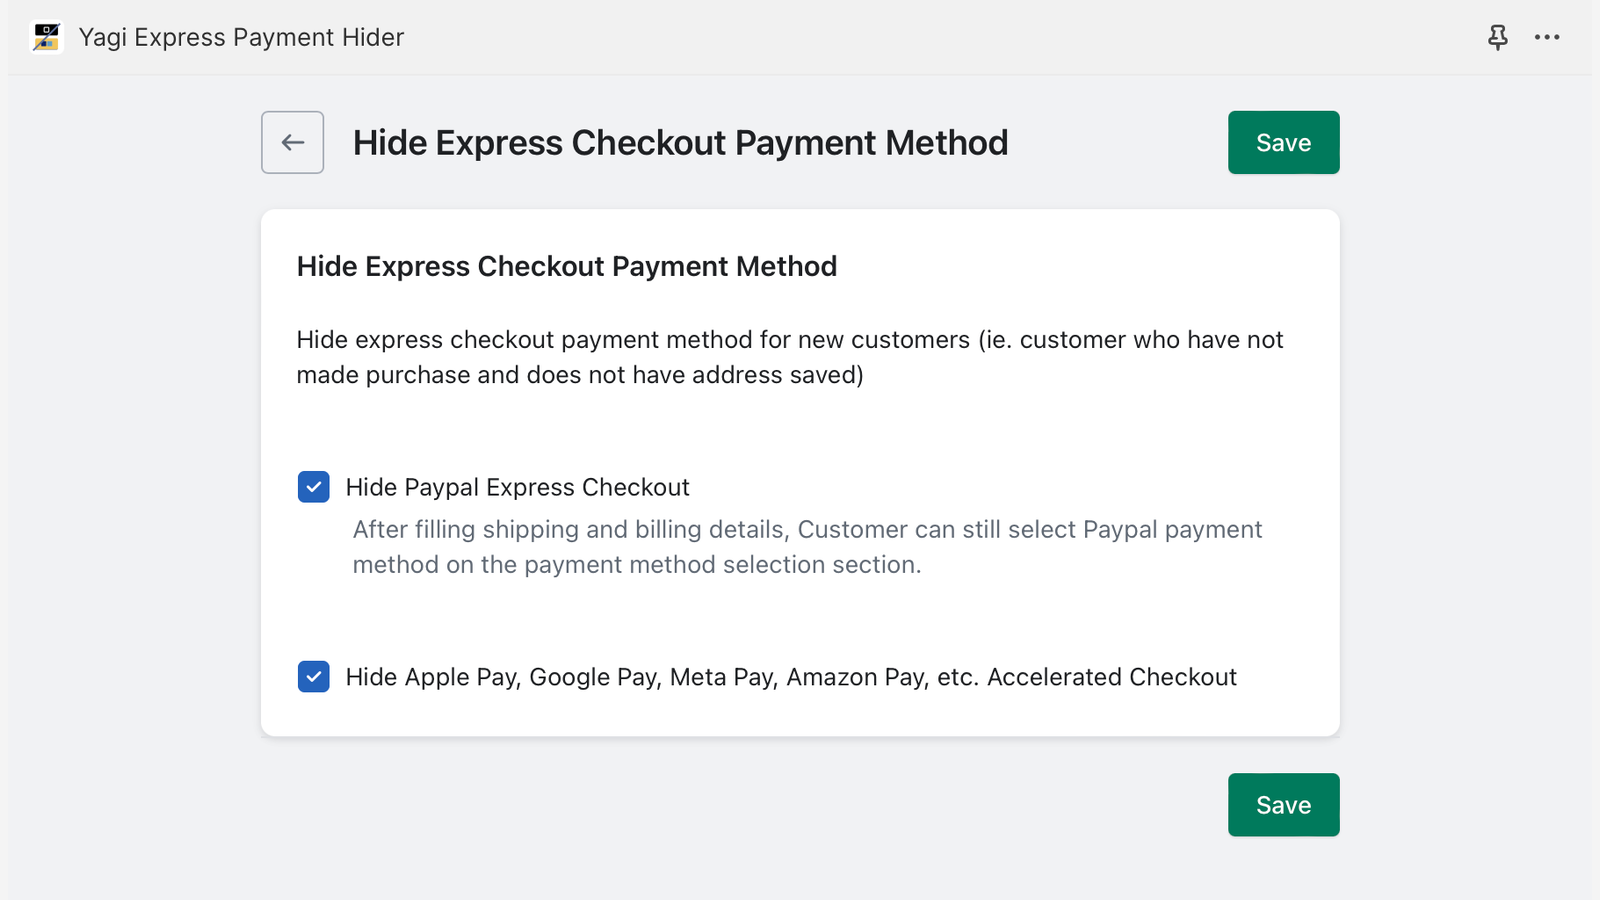 Configuration interface to hide express checkout payment methods